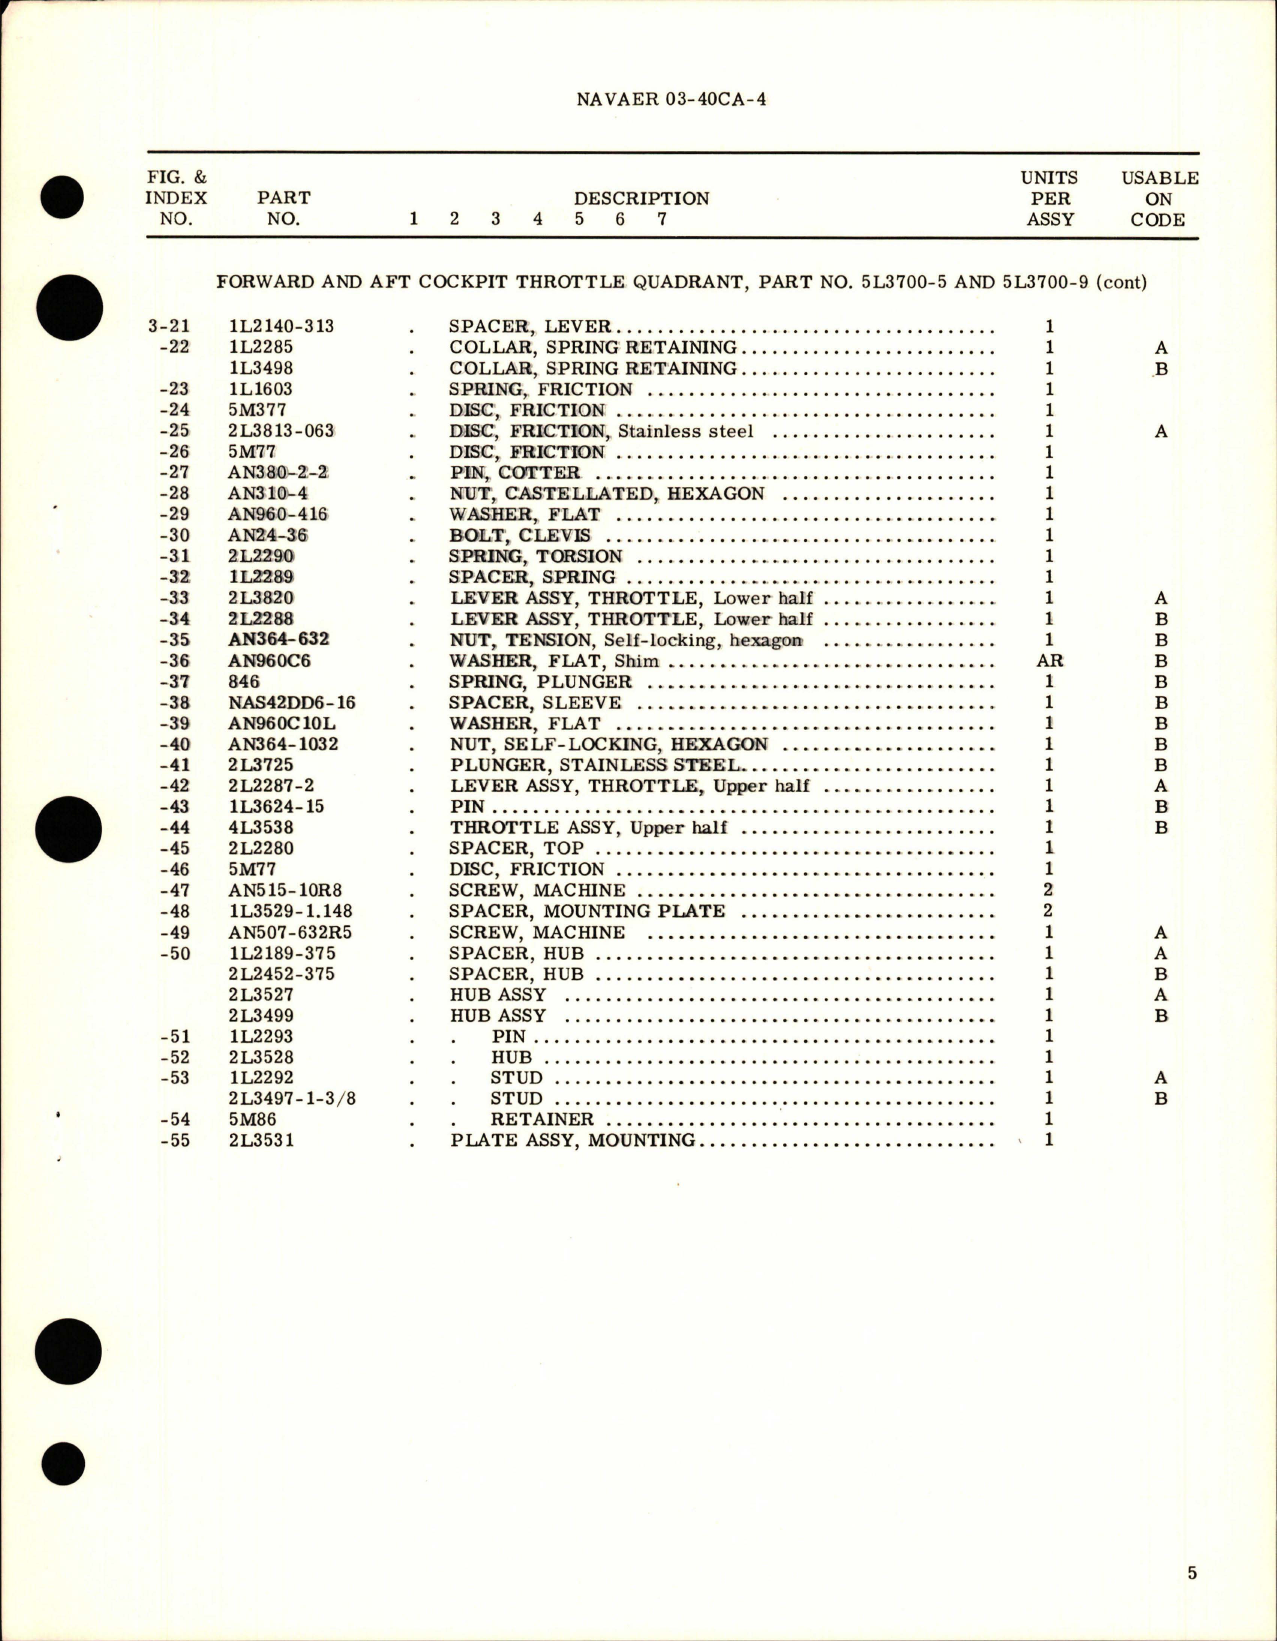 Sample page 5 from AirCorps Library document:  Overhaul Instructions with Parts Breakdown for Cockpit Throttle Quadrant - Parts 5L3700-5 and 5L3700-9 